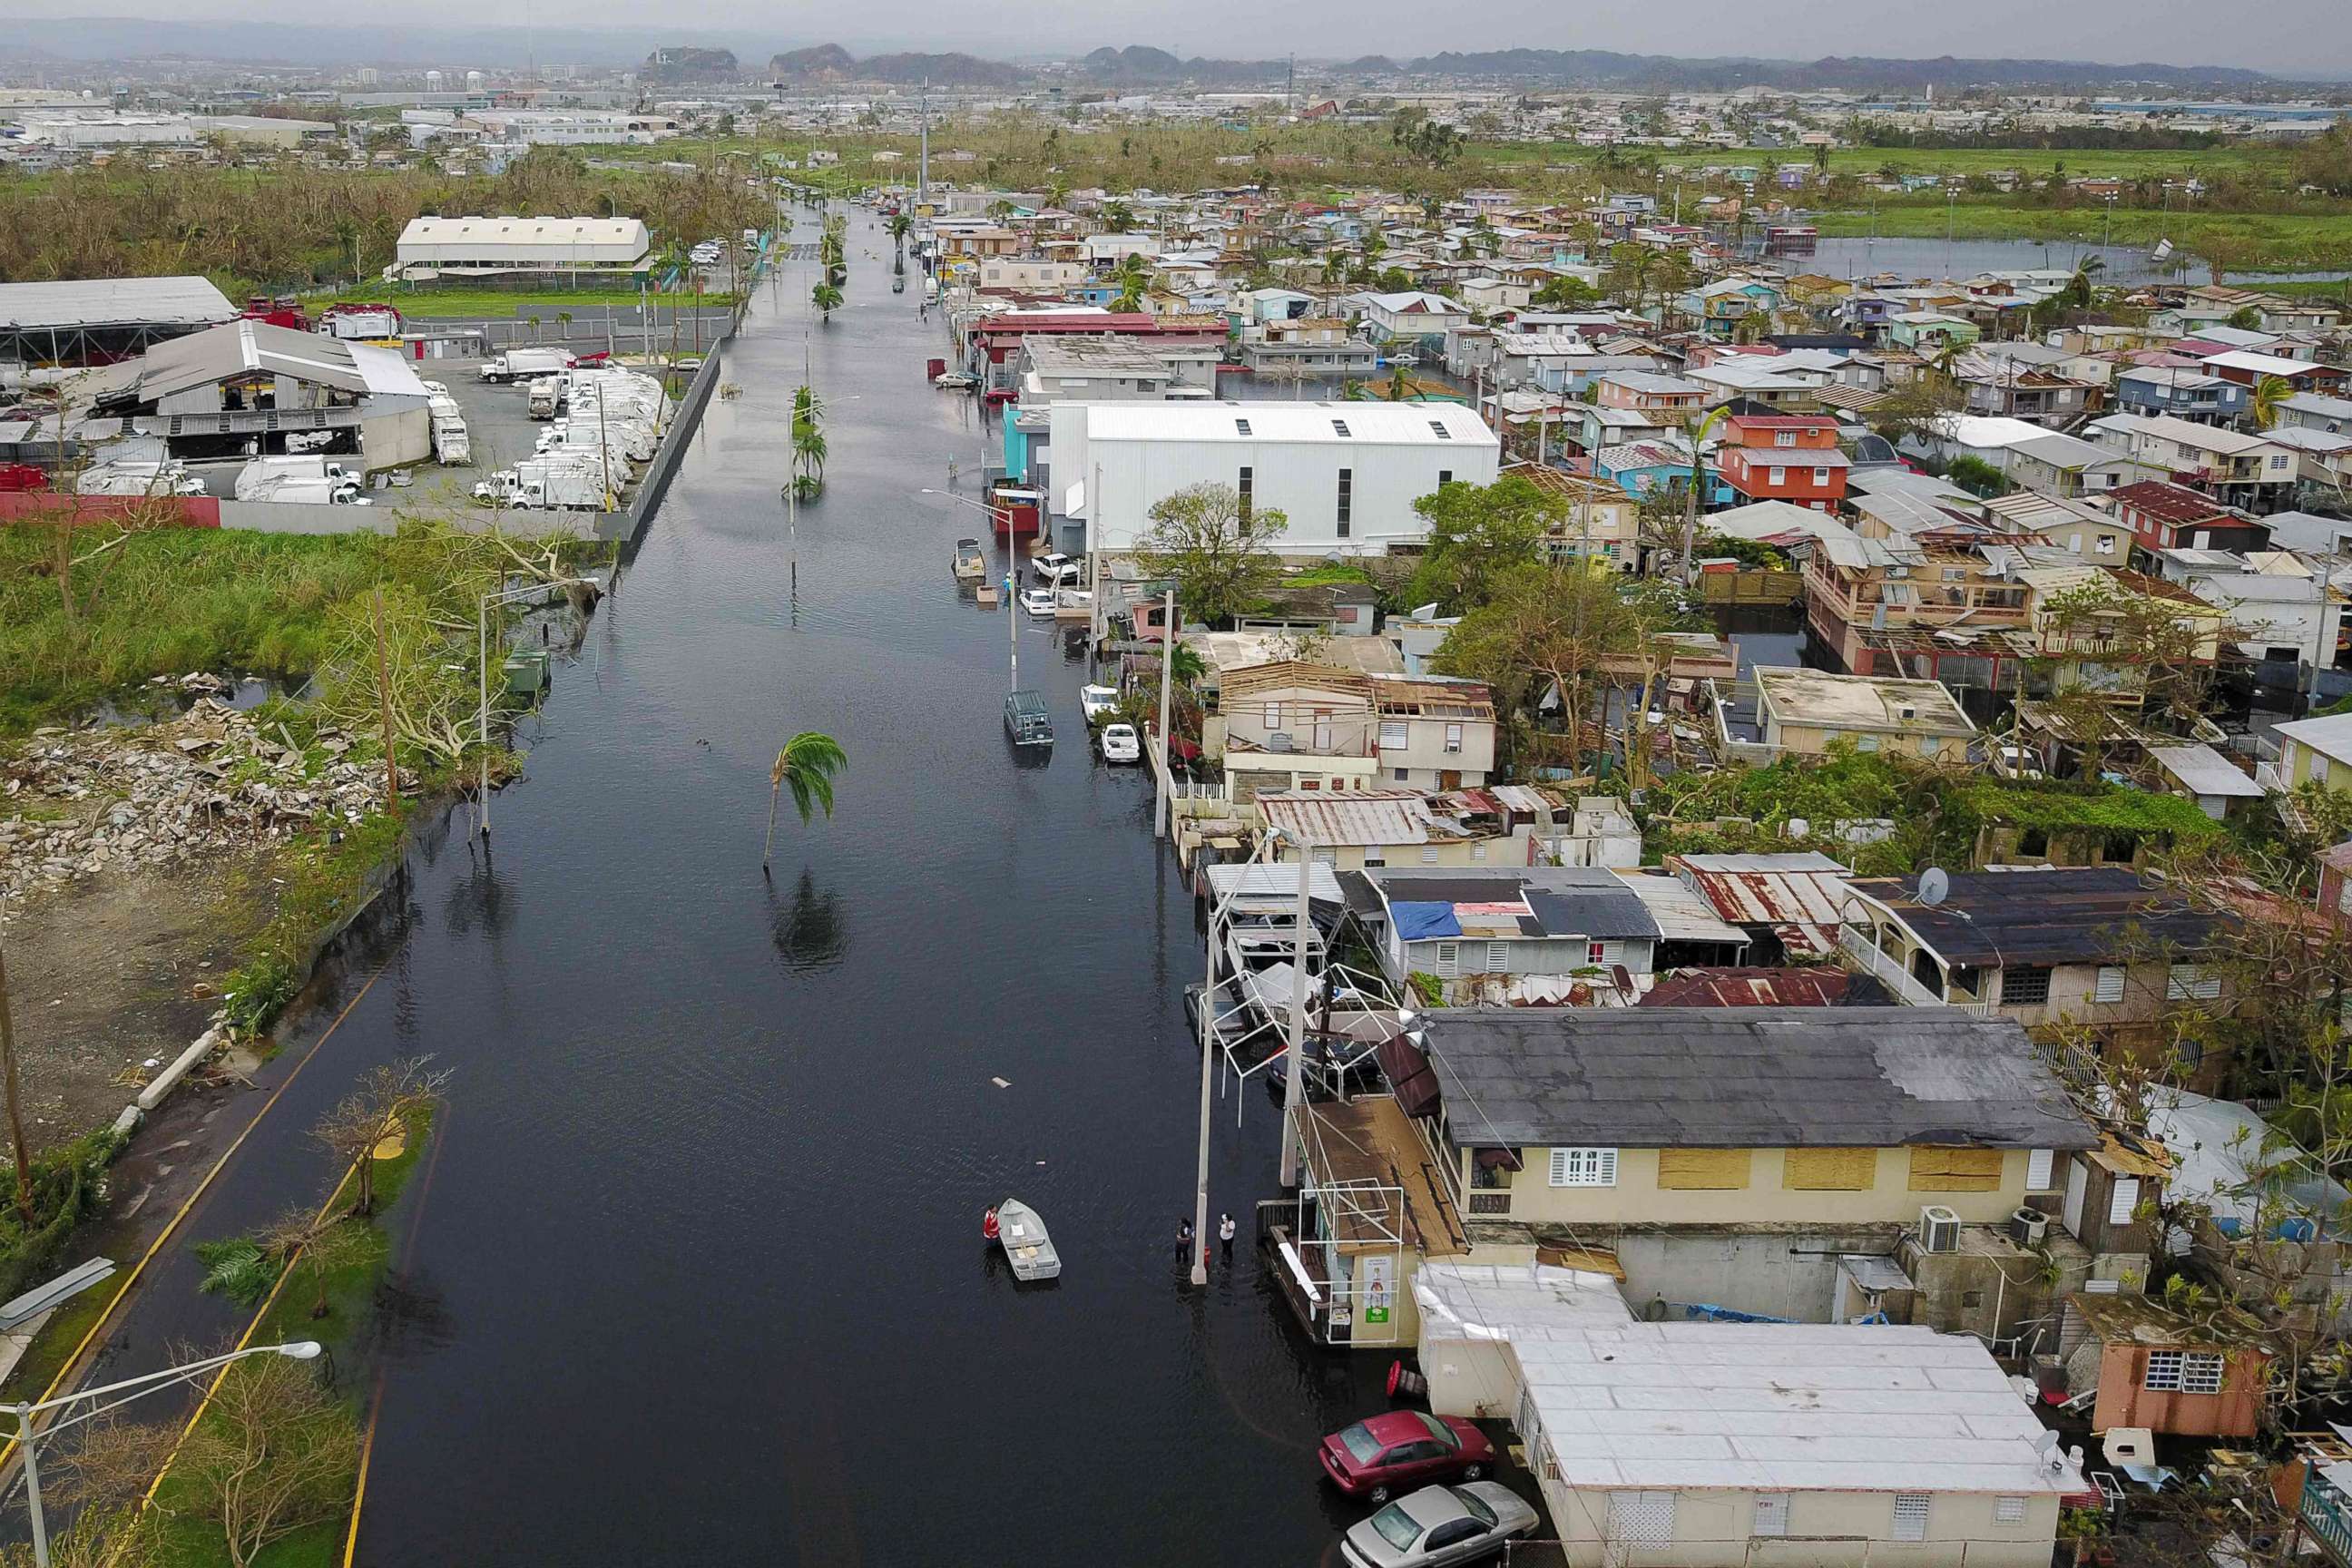 PHOTO: An aerial view shows the flooded neighborhood of Juana Matos in the aftermath of Hurricane Maria in Catano, Puerto Rico, Sept. 22, 2017.